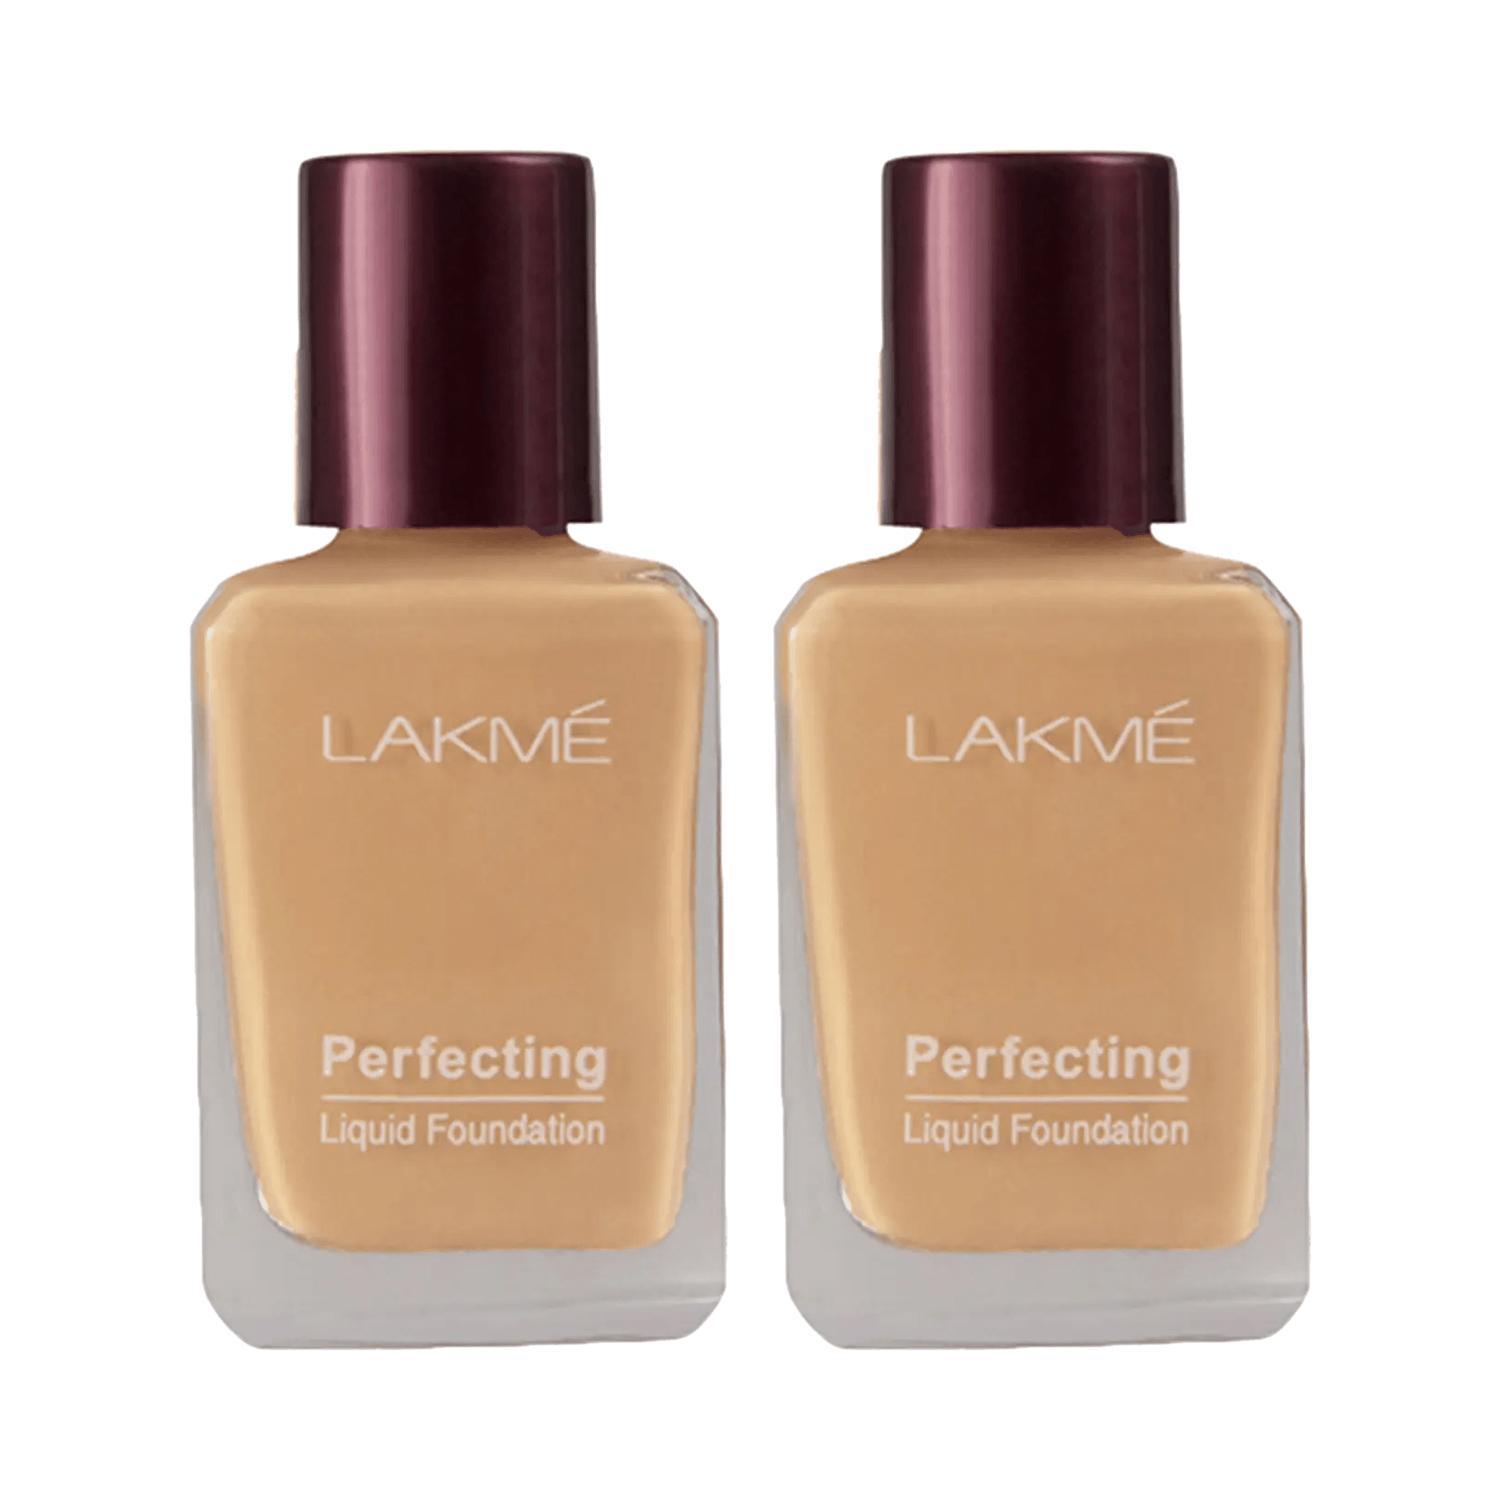 lakme perfecting liquid foundation natural pearl (27 ml) - (pack of 2)